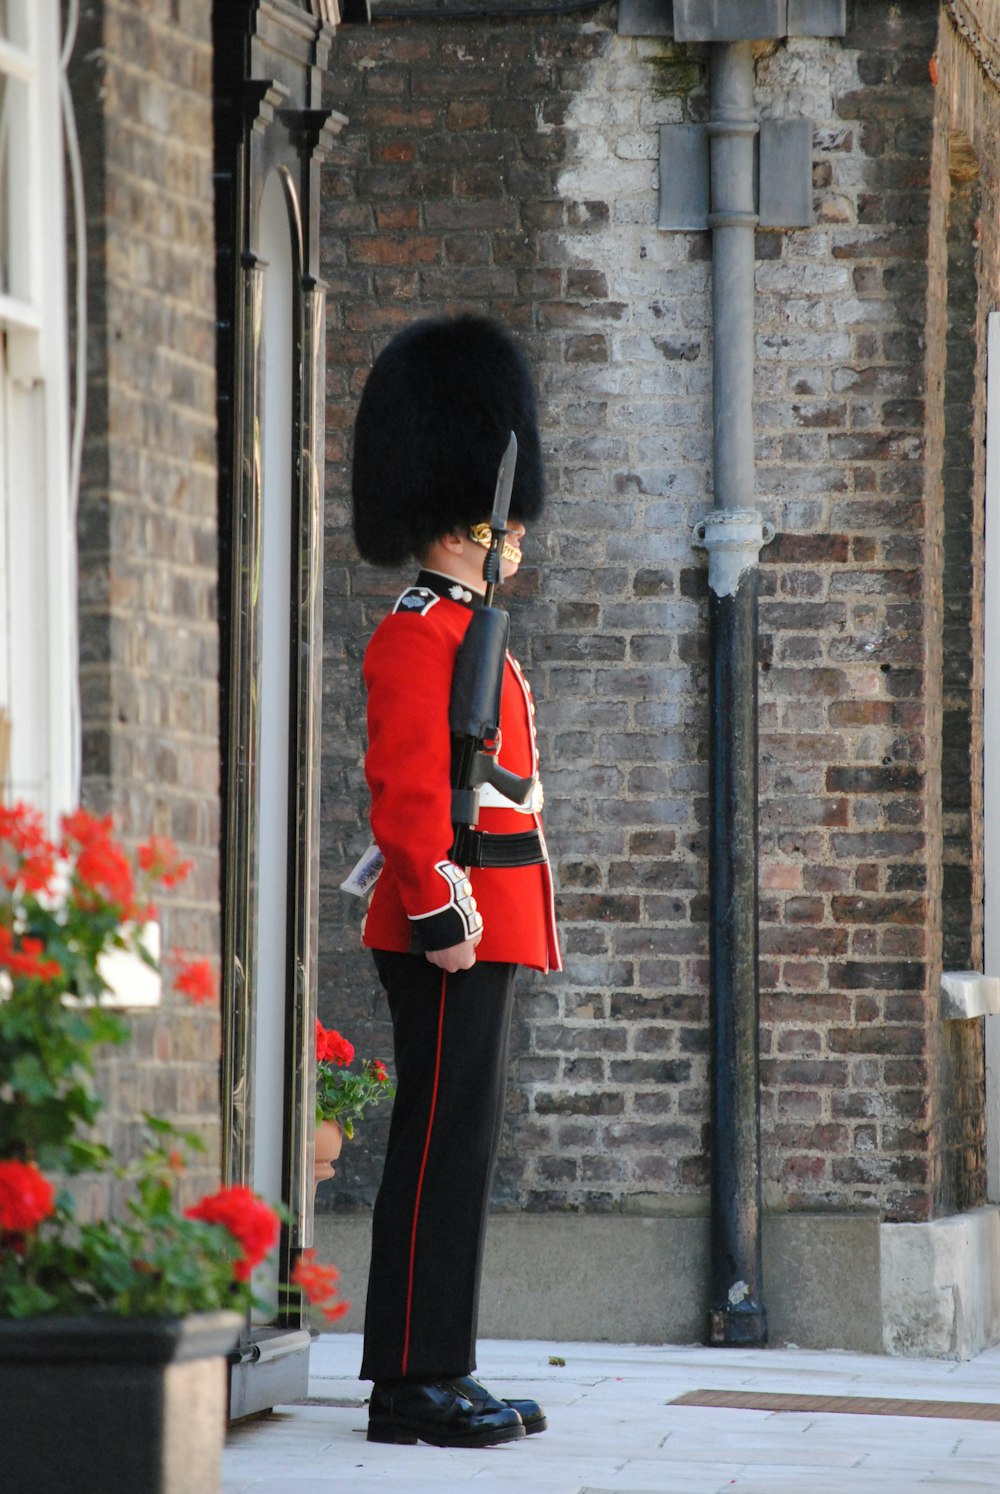 person in red and black uniform standing near black metal post during daytime